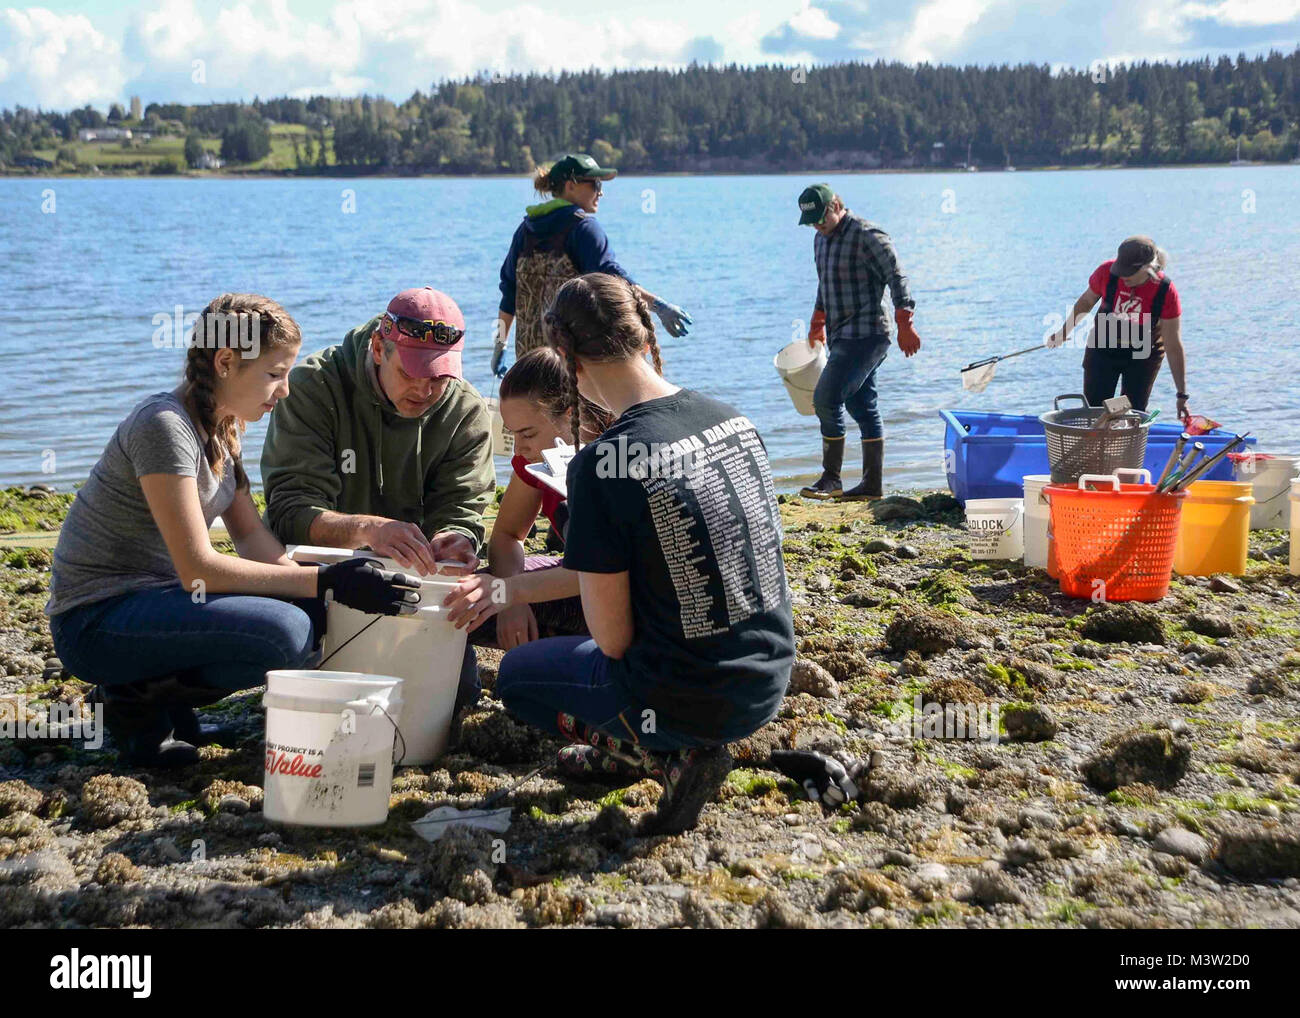 170428-N-VH385-104 INDIAN ISLAND, Wash., (April 28, 2017) – Jake Gregg, a fishery biologist with the United States Geological Survey (USGS), measures a fish with students from Blue Heron Middle School during a community outreach beach seining at Naval Magazine Indian Island. This is the third year the USGS has teamed up with Blue Heron Middle School and Naval Magazine Indian Island to conduct beach seinings in preparation for the Kilsut Spit waterflow to be opened between Marrowstone and Indian Island. (U.S. Navy photo by Mass Communication Specialist 3rd Class Wyatt L. Anthony) 170428-N-VH385 Stock Photo